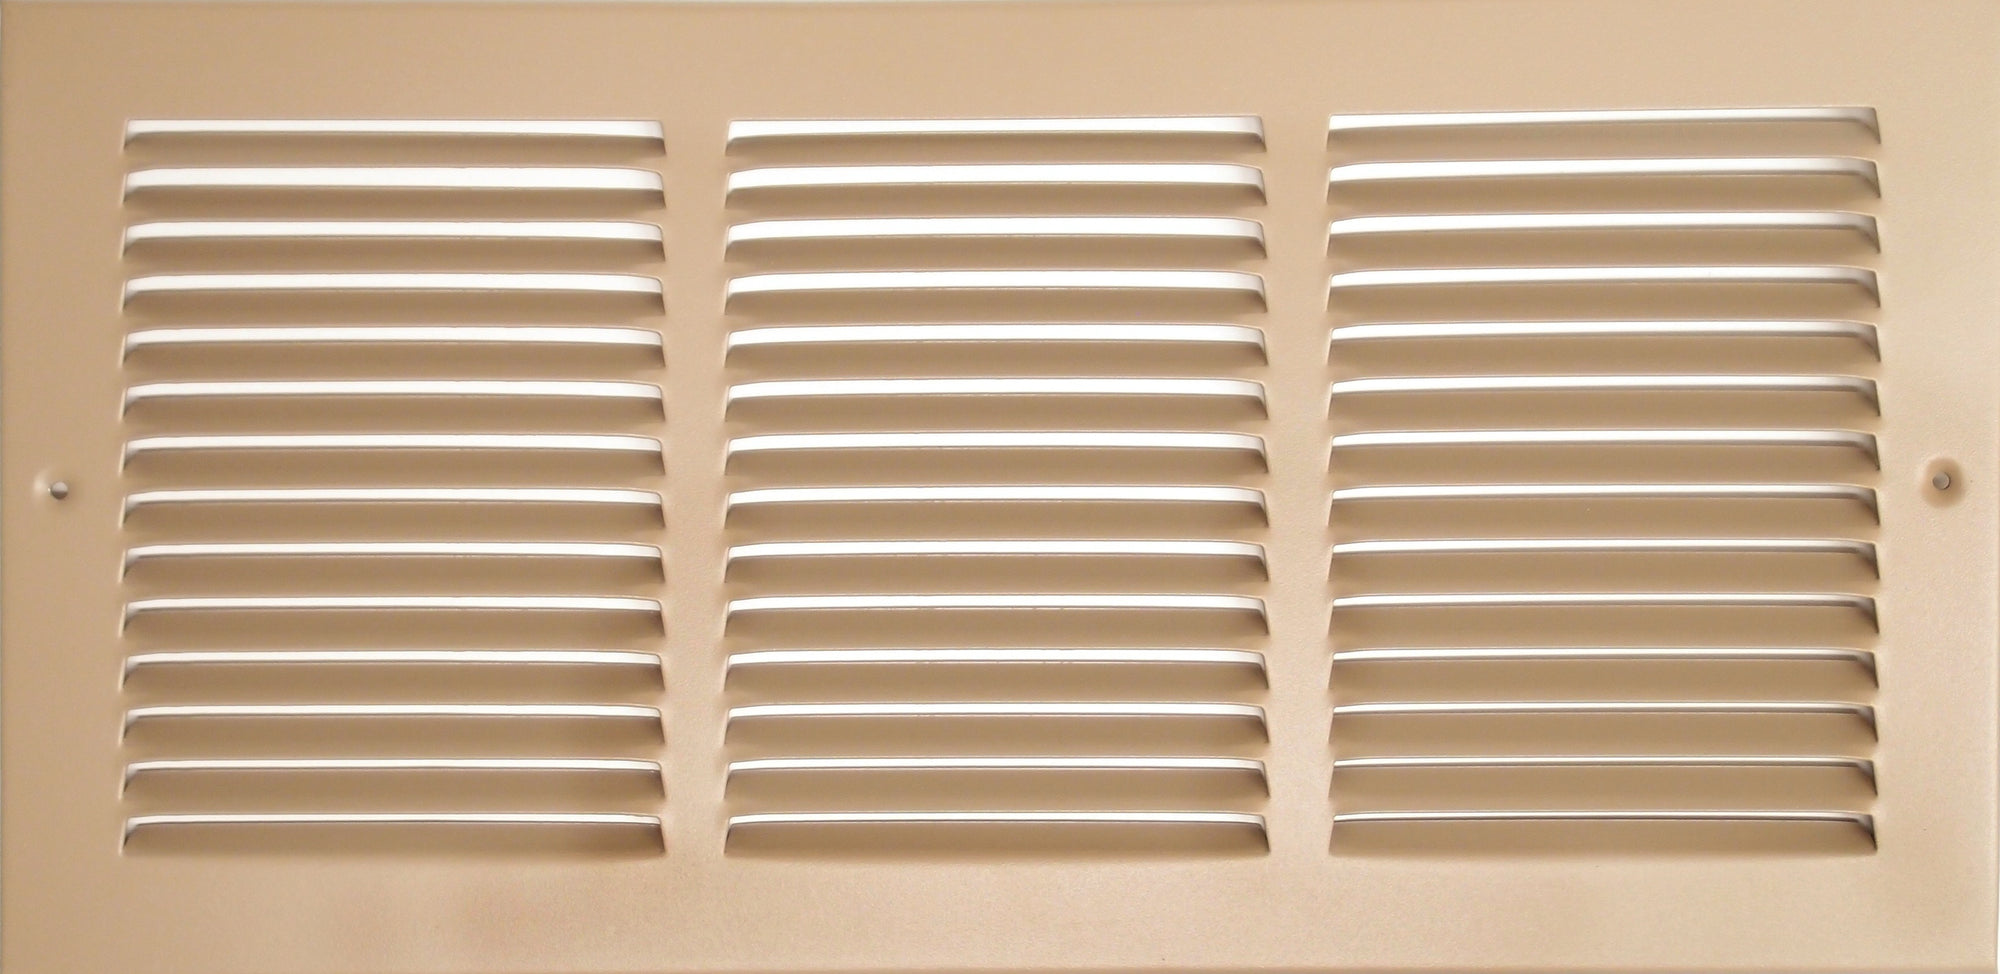 24" X 14" Air Vent Return Grilles - Sidewall and Ceiling - Steel